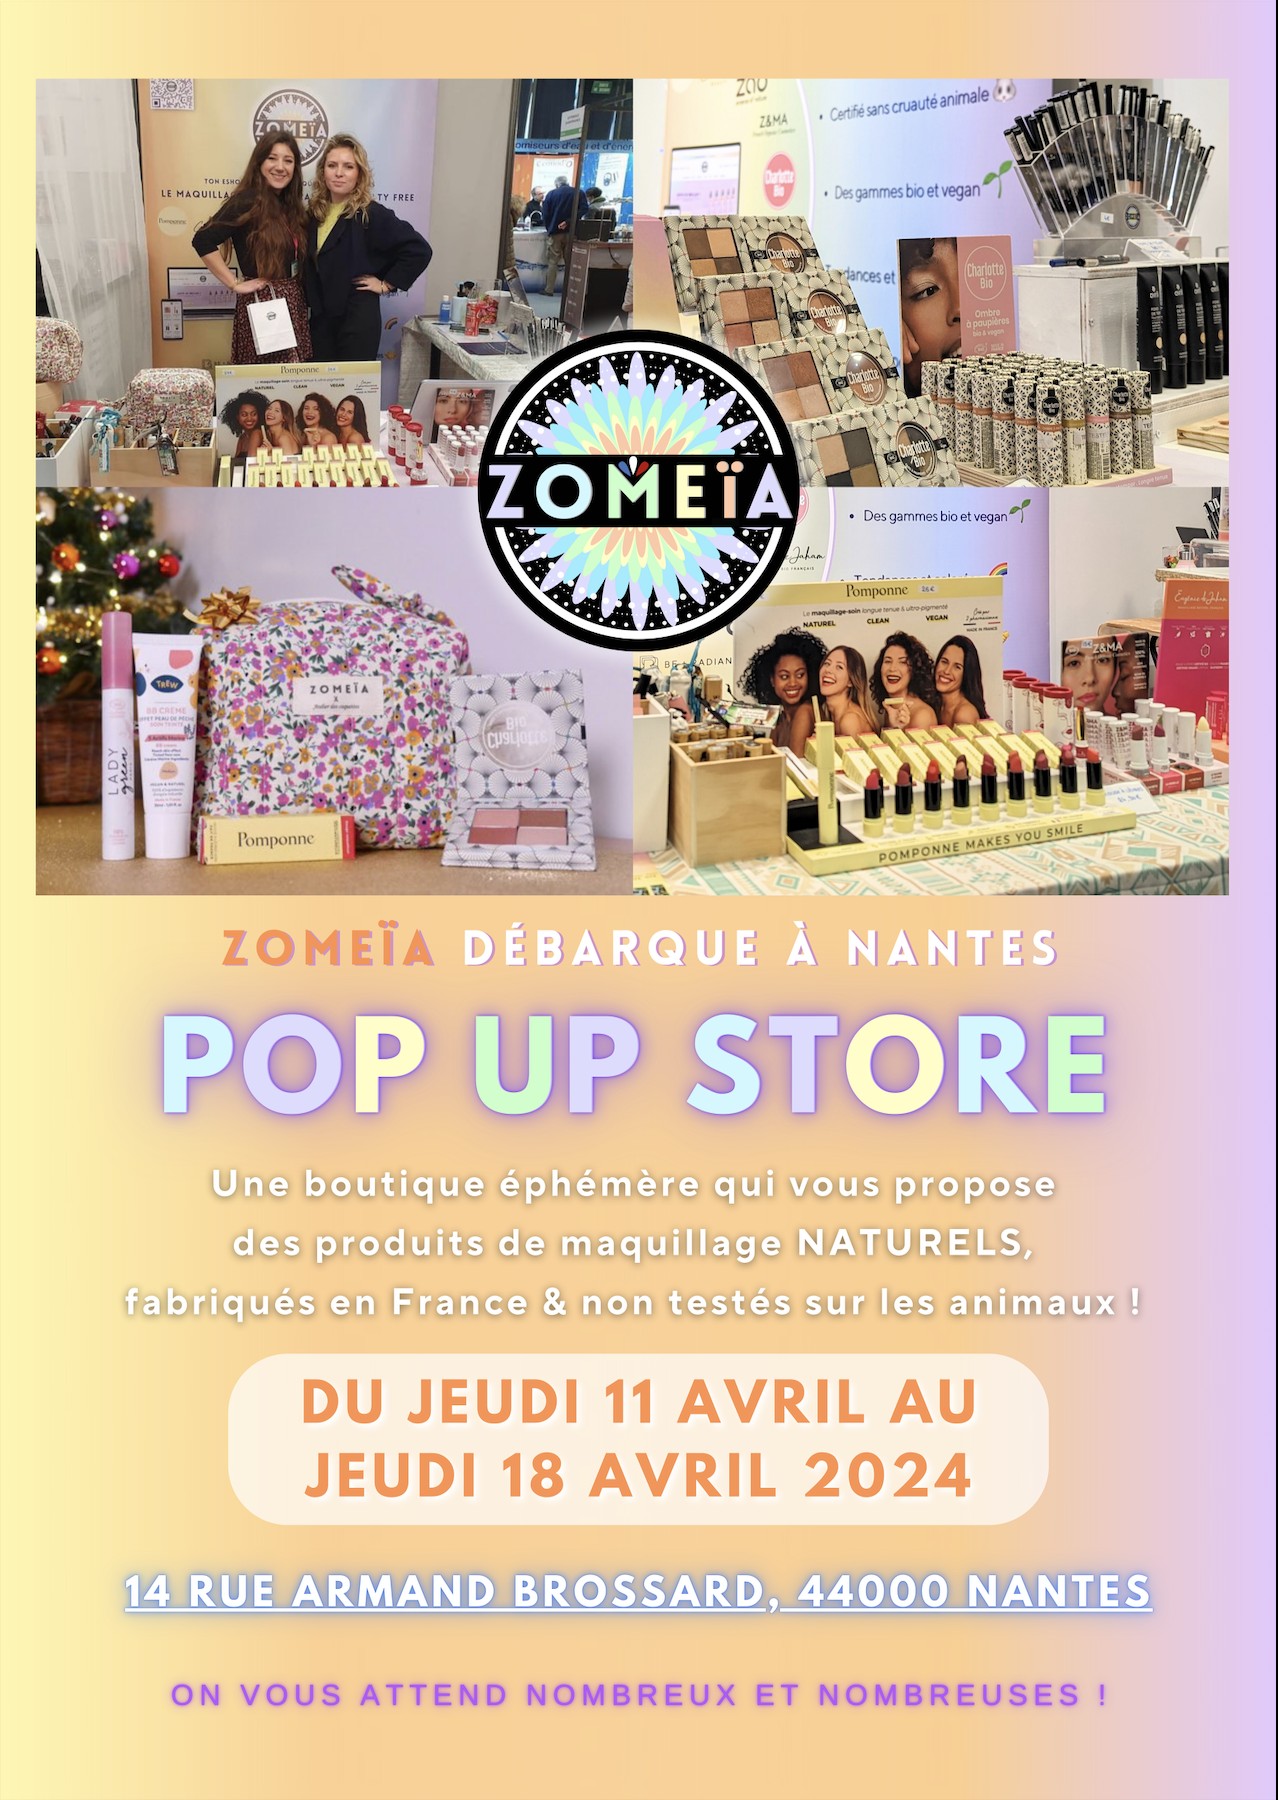 pop-up-store-zomeia